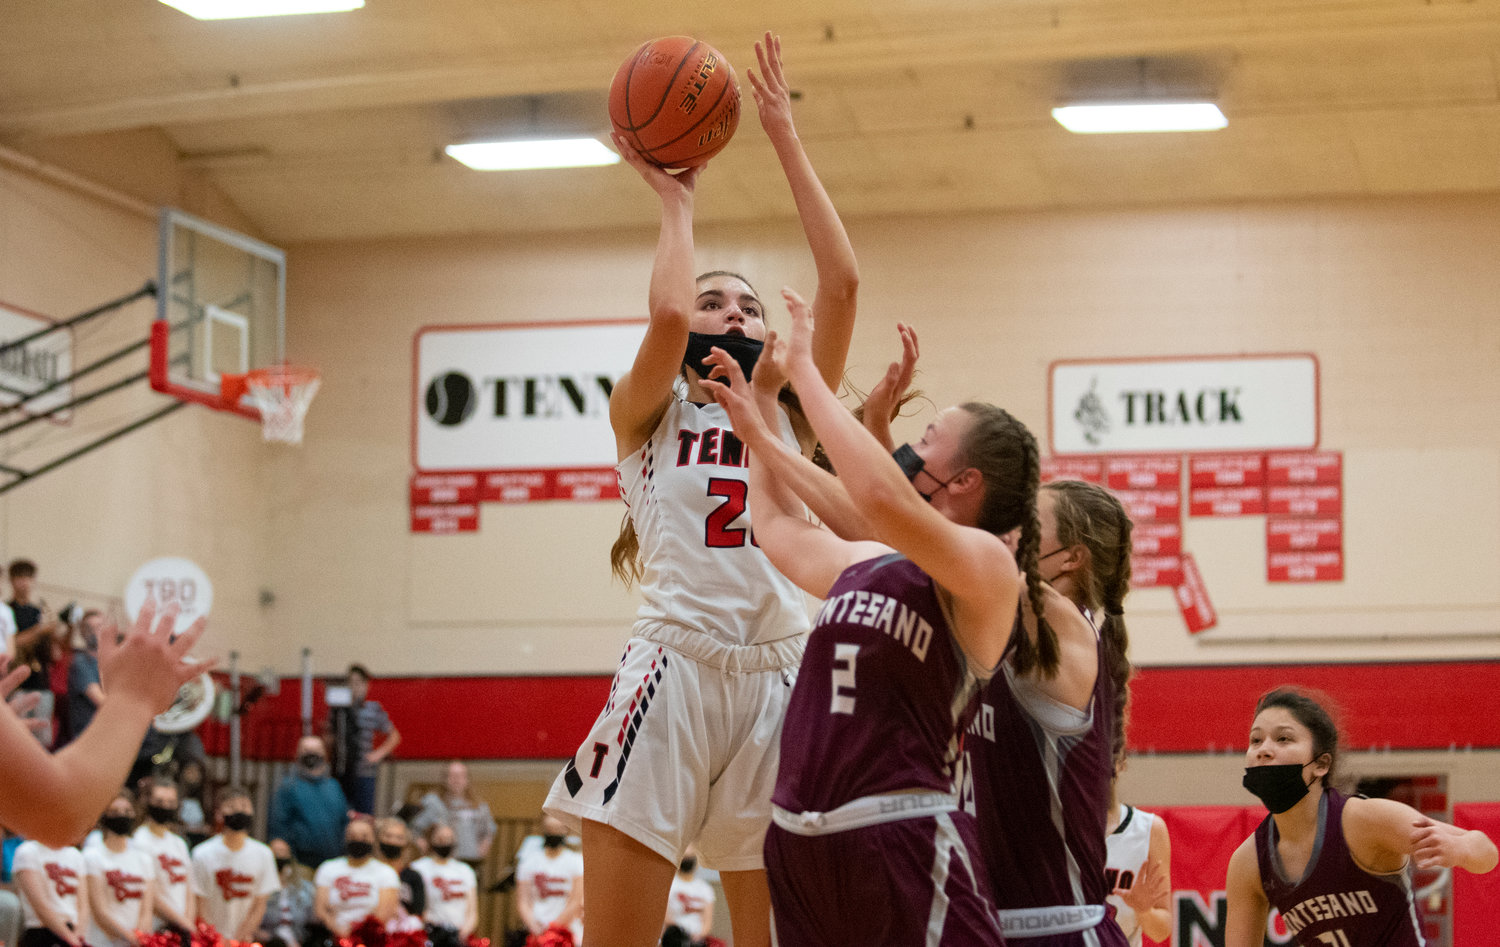 Tenino junior Ashley Schow shoots over a Montesano double team in a 1A Evergreen Conference matchup Thursday in Tenino.